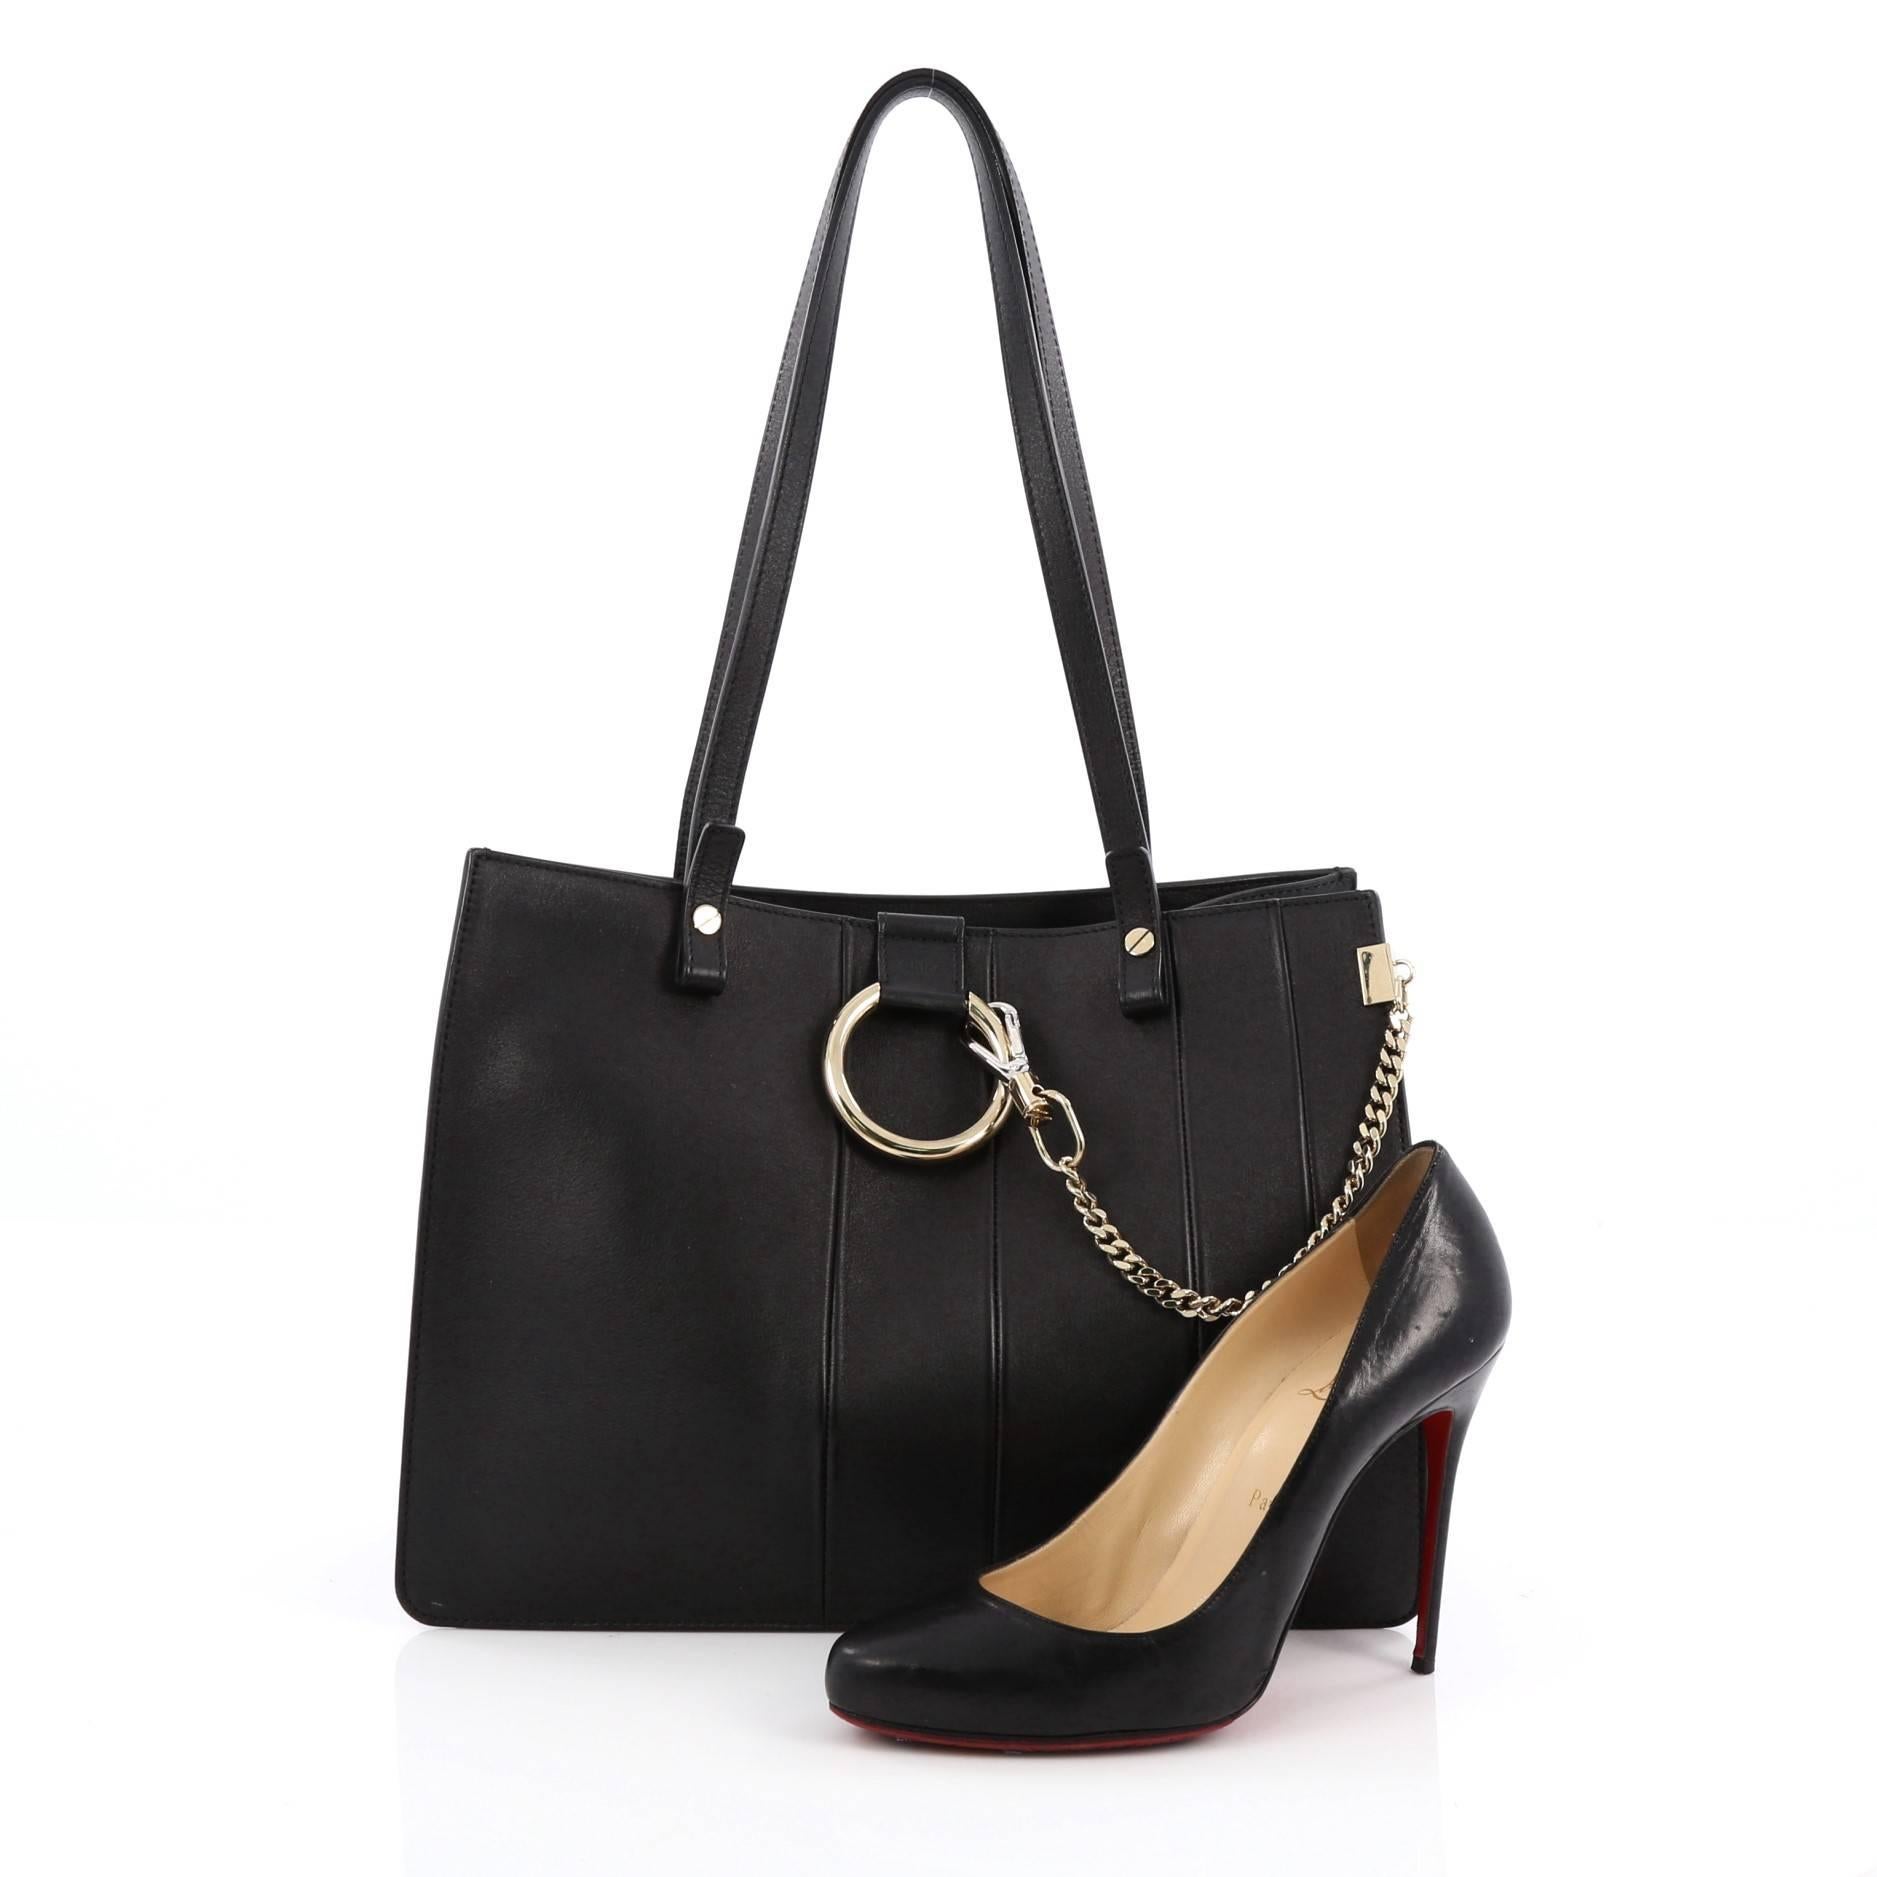 This authentic Chloe Faye Tote Stitched Leather Small personifies Chloe's unique luxe bohemian aesthetic with a minimalist spin. Crafted from black leather, this sleek, stylish tote features dual-flat leather handles, ring with chain, stamped logo